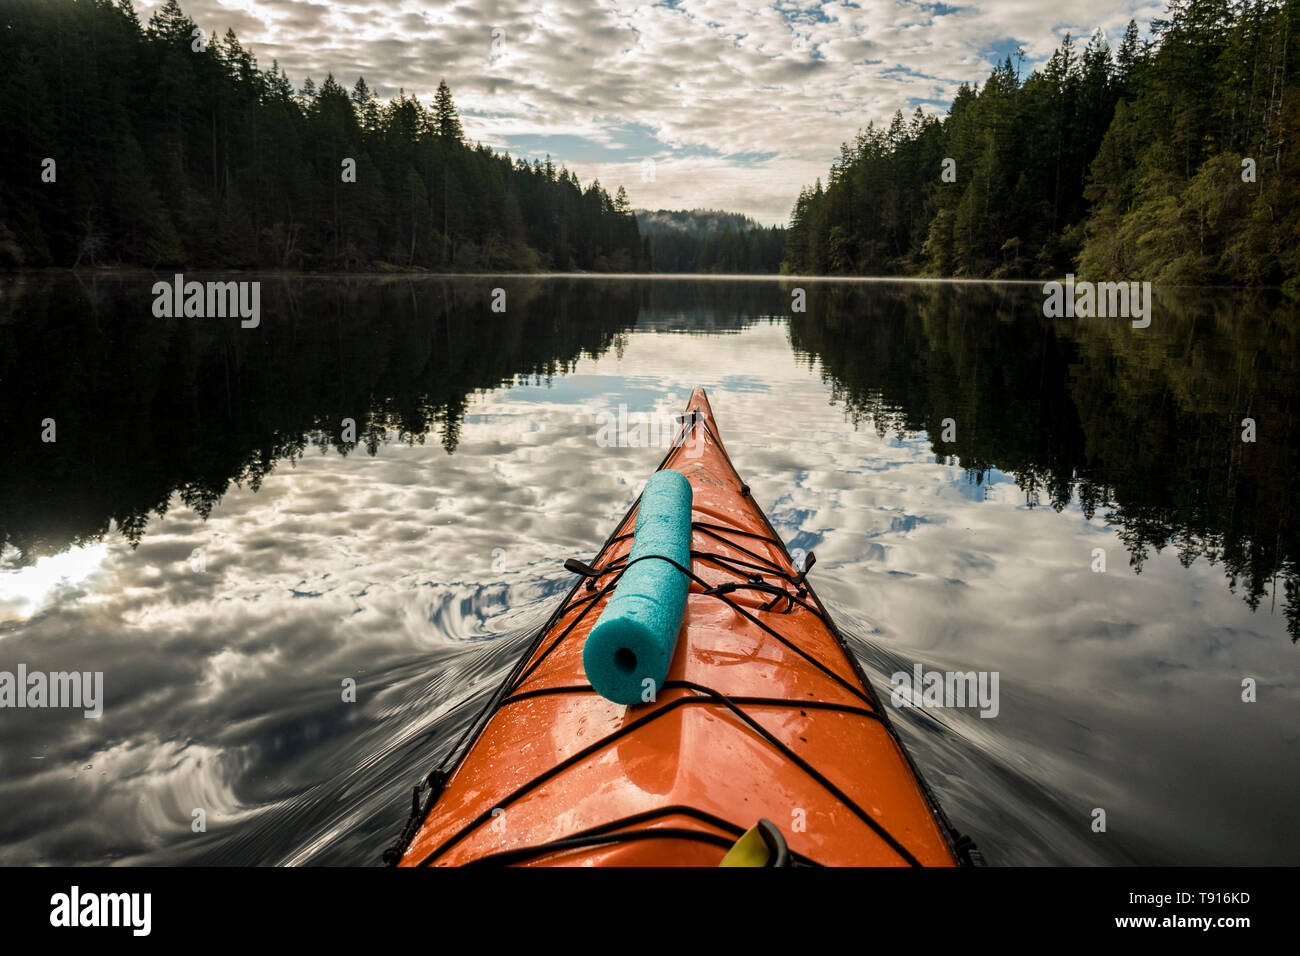 A kayak parts the tranquil water of Main Lake in Main Lake Provincial Park on Quadra Island British Columbia, Canada. Stock Photo